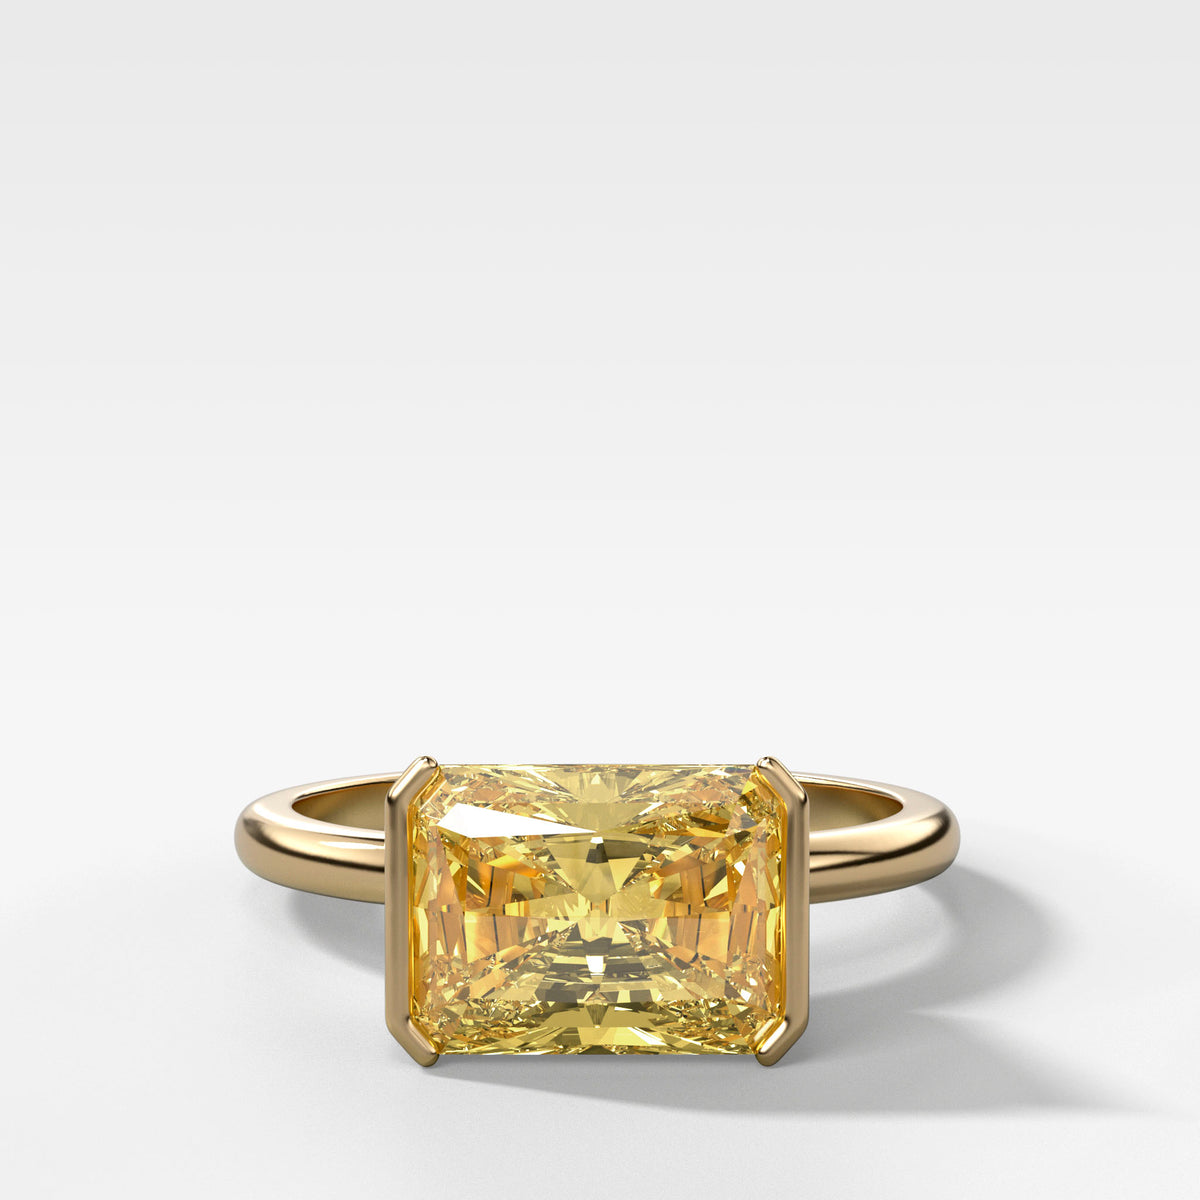 East West Half Bezel Solitaire Engagement Ring With Canary Yellow Elongated Radiant Cut Diamond